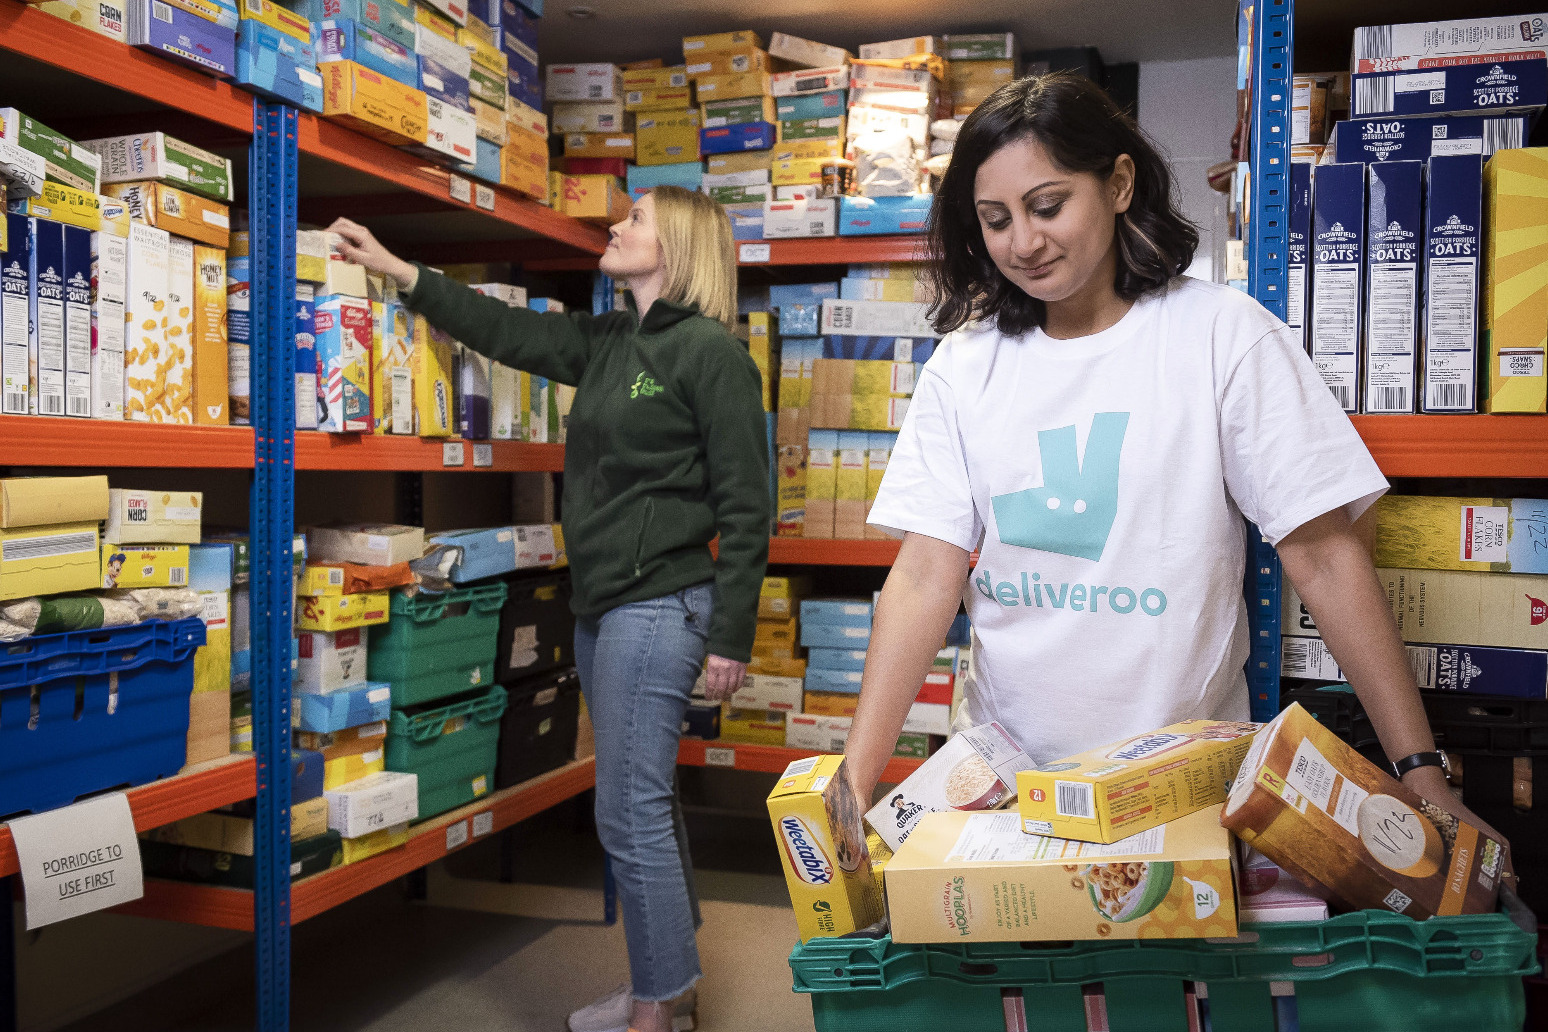 Nearly one in 10 parents ‘very likely’ to need food bank 